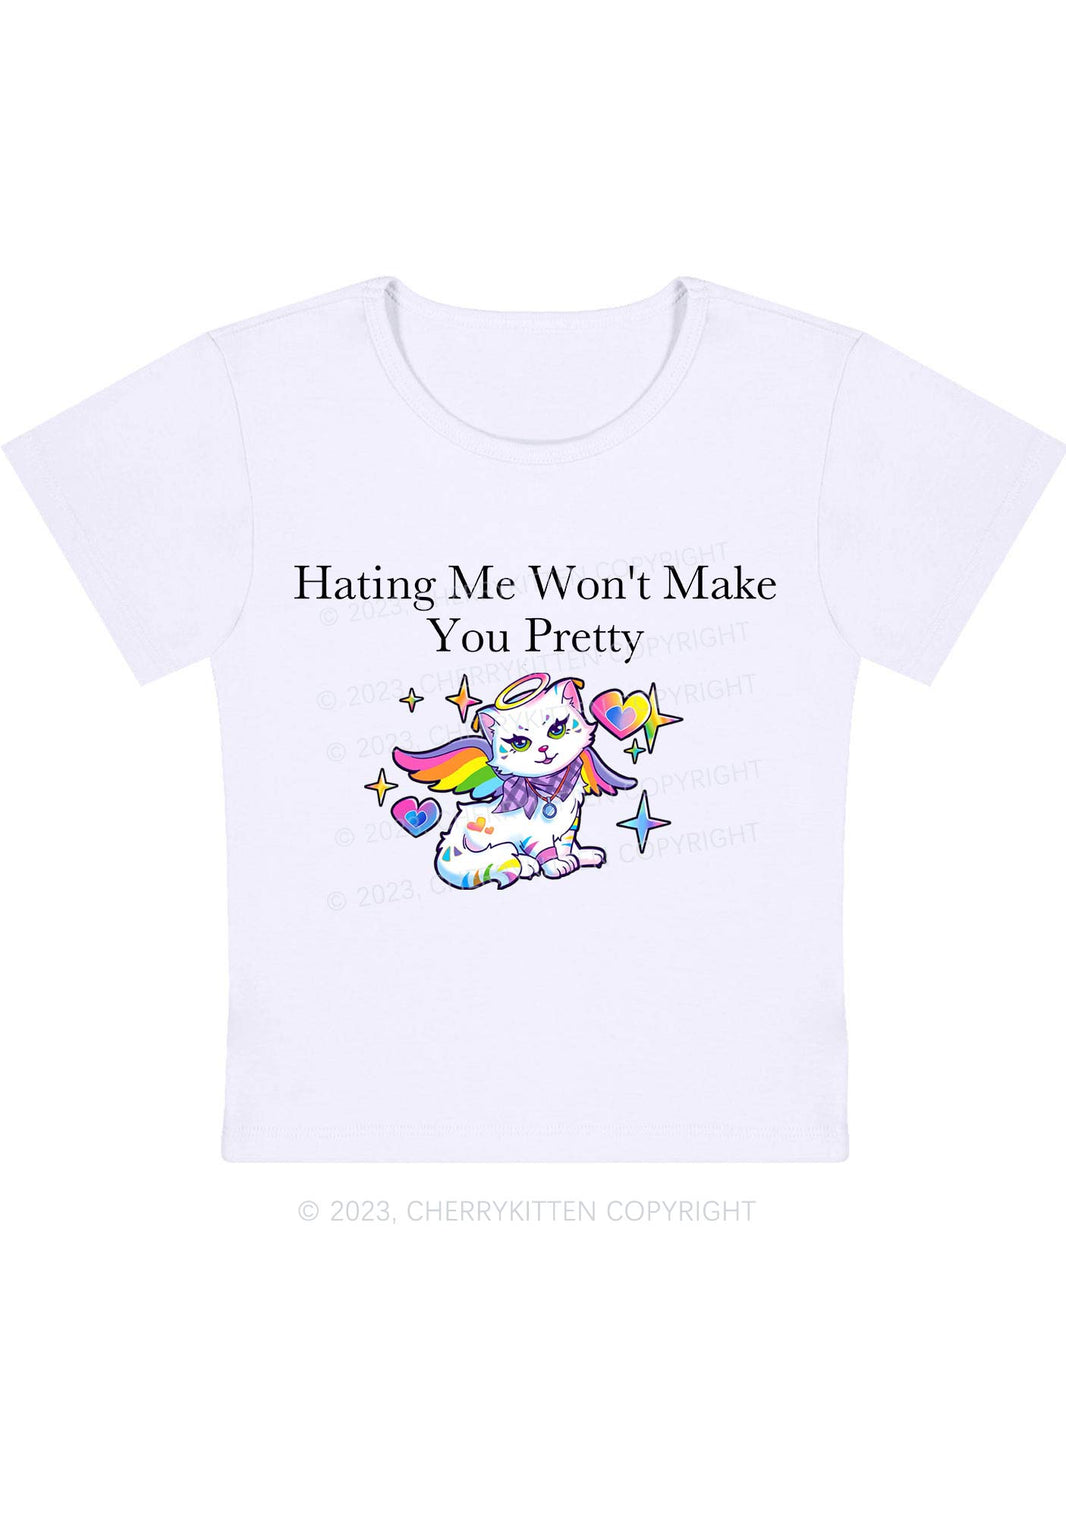 Y2K Graphic Baby Tees With Funny & Cute Designs - Cherrykitten.com